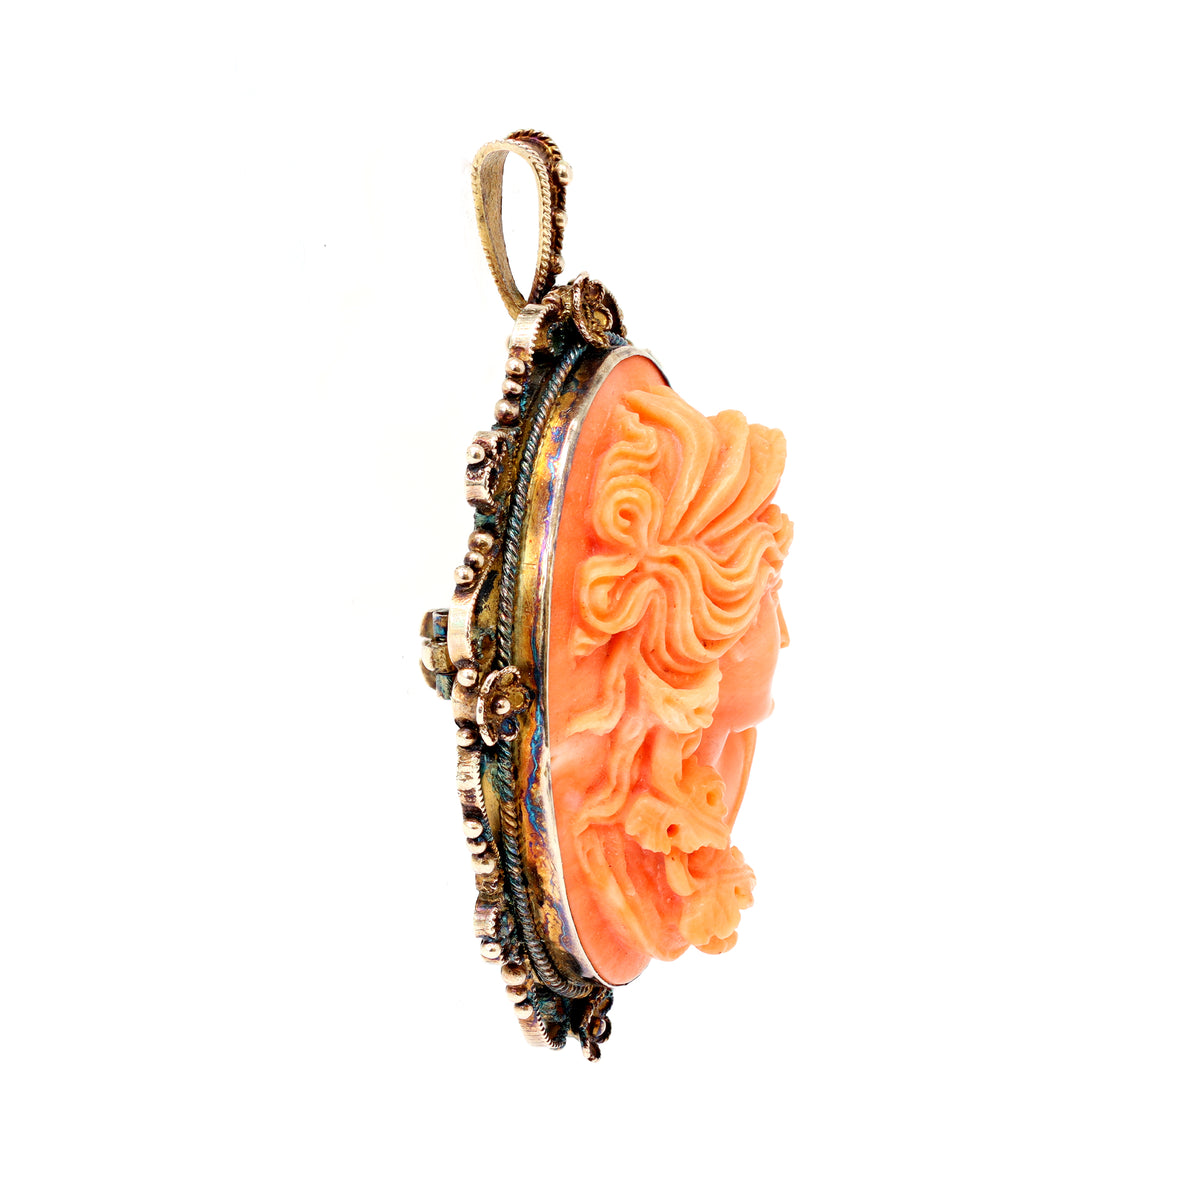 Antique-italian-coral-cameo-pendant-broooch-side-one-view-2000x2000.jpg